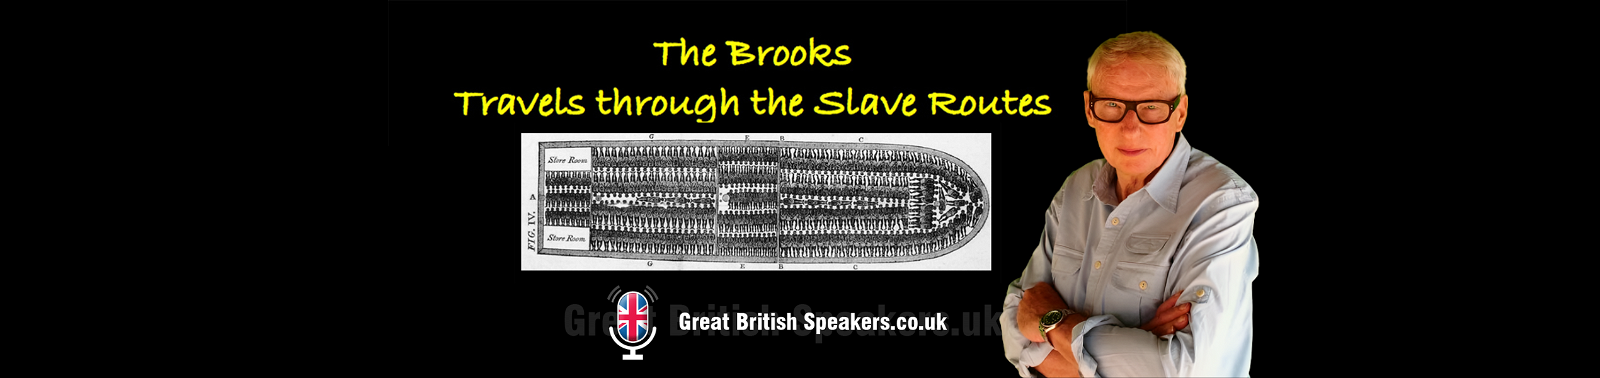 Travels through the slave routes a history of modern black slavery black history month speaker Jeremy Hunter